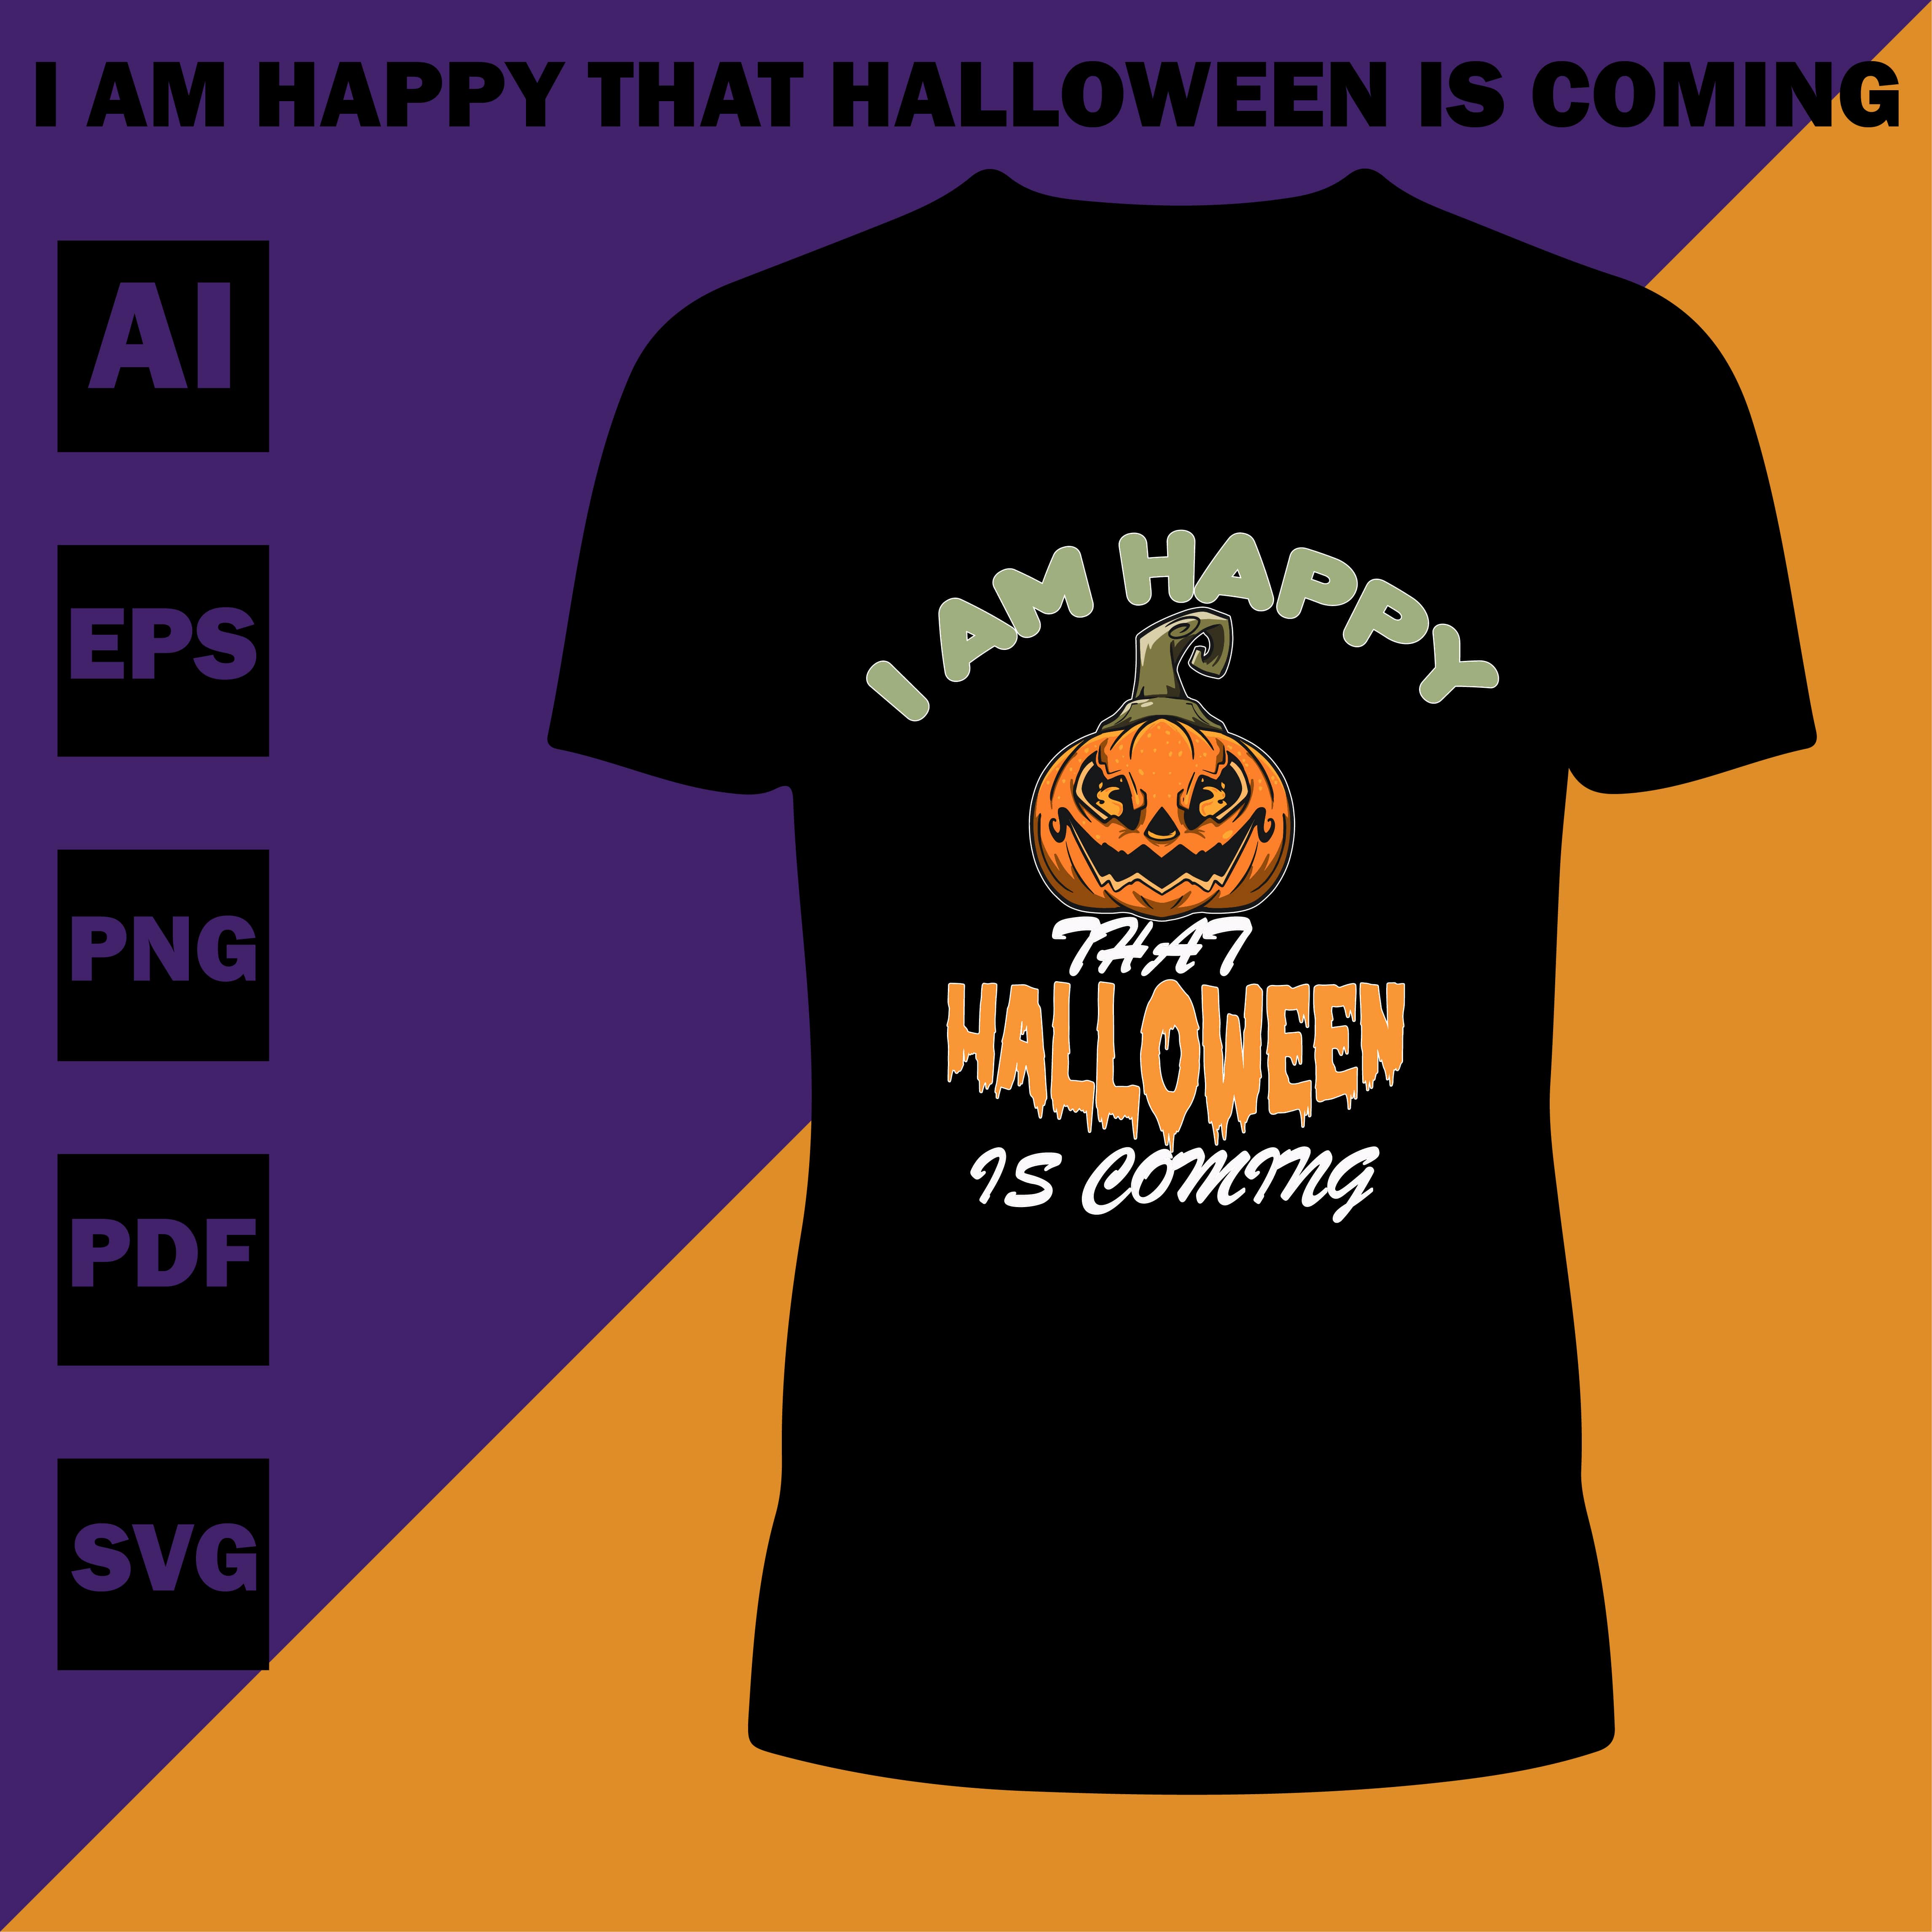 I Am Happy That Halloween Is Coming cover image.